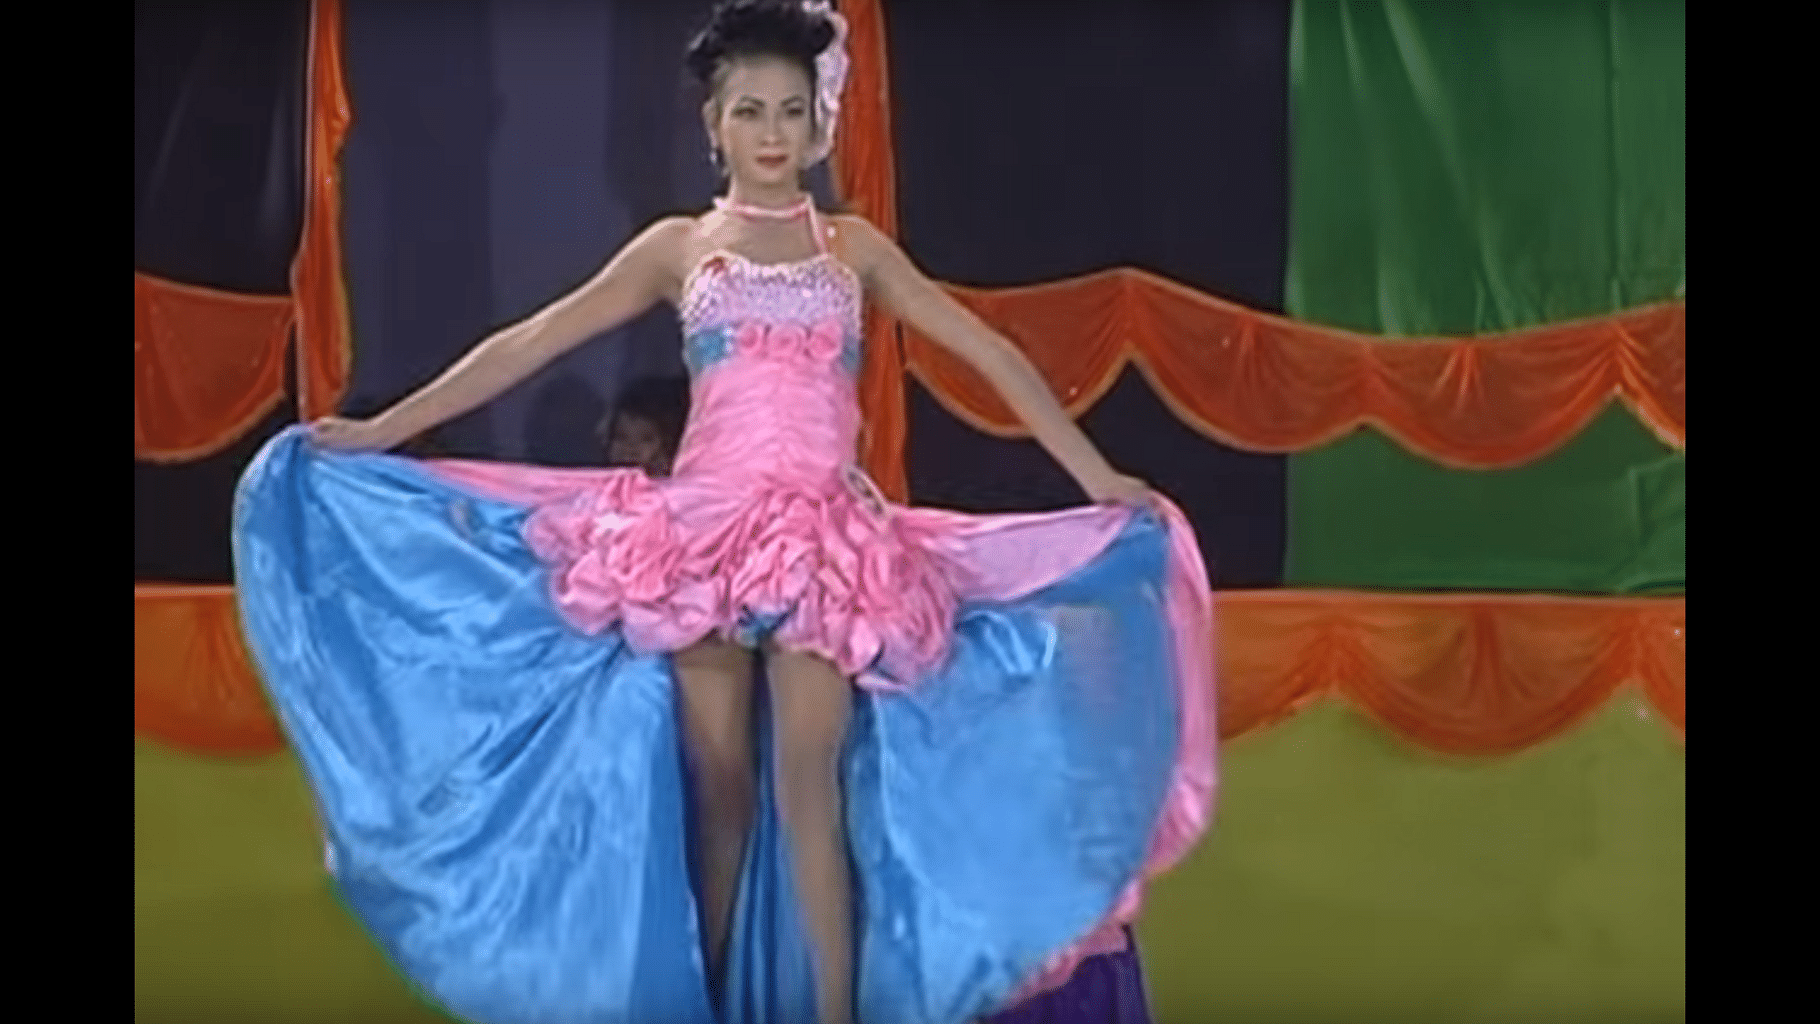 

A participant at the beauty pageant in Manipur. (Photo: <a href="https://www.youtube.com/watch?v=exkQ6a6ZtWM">YouTube</a>)